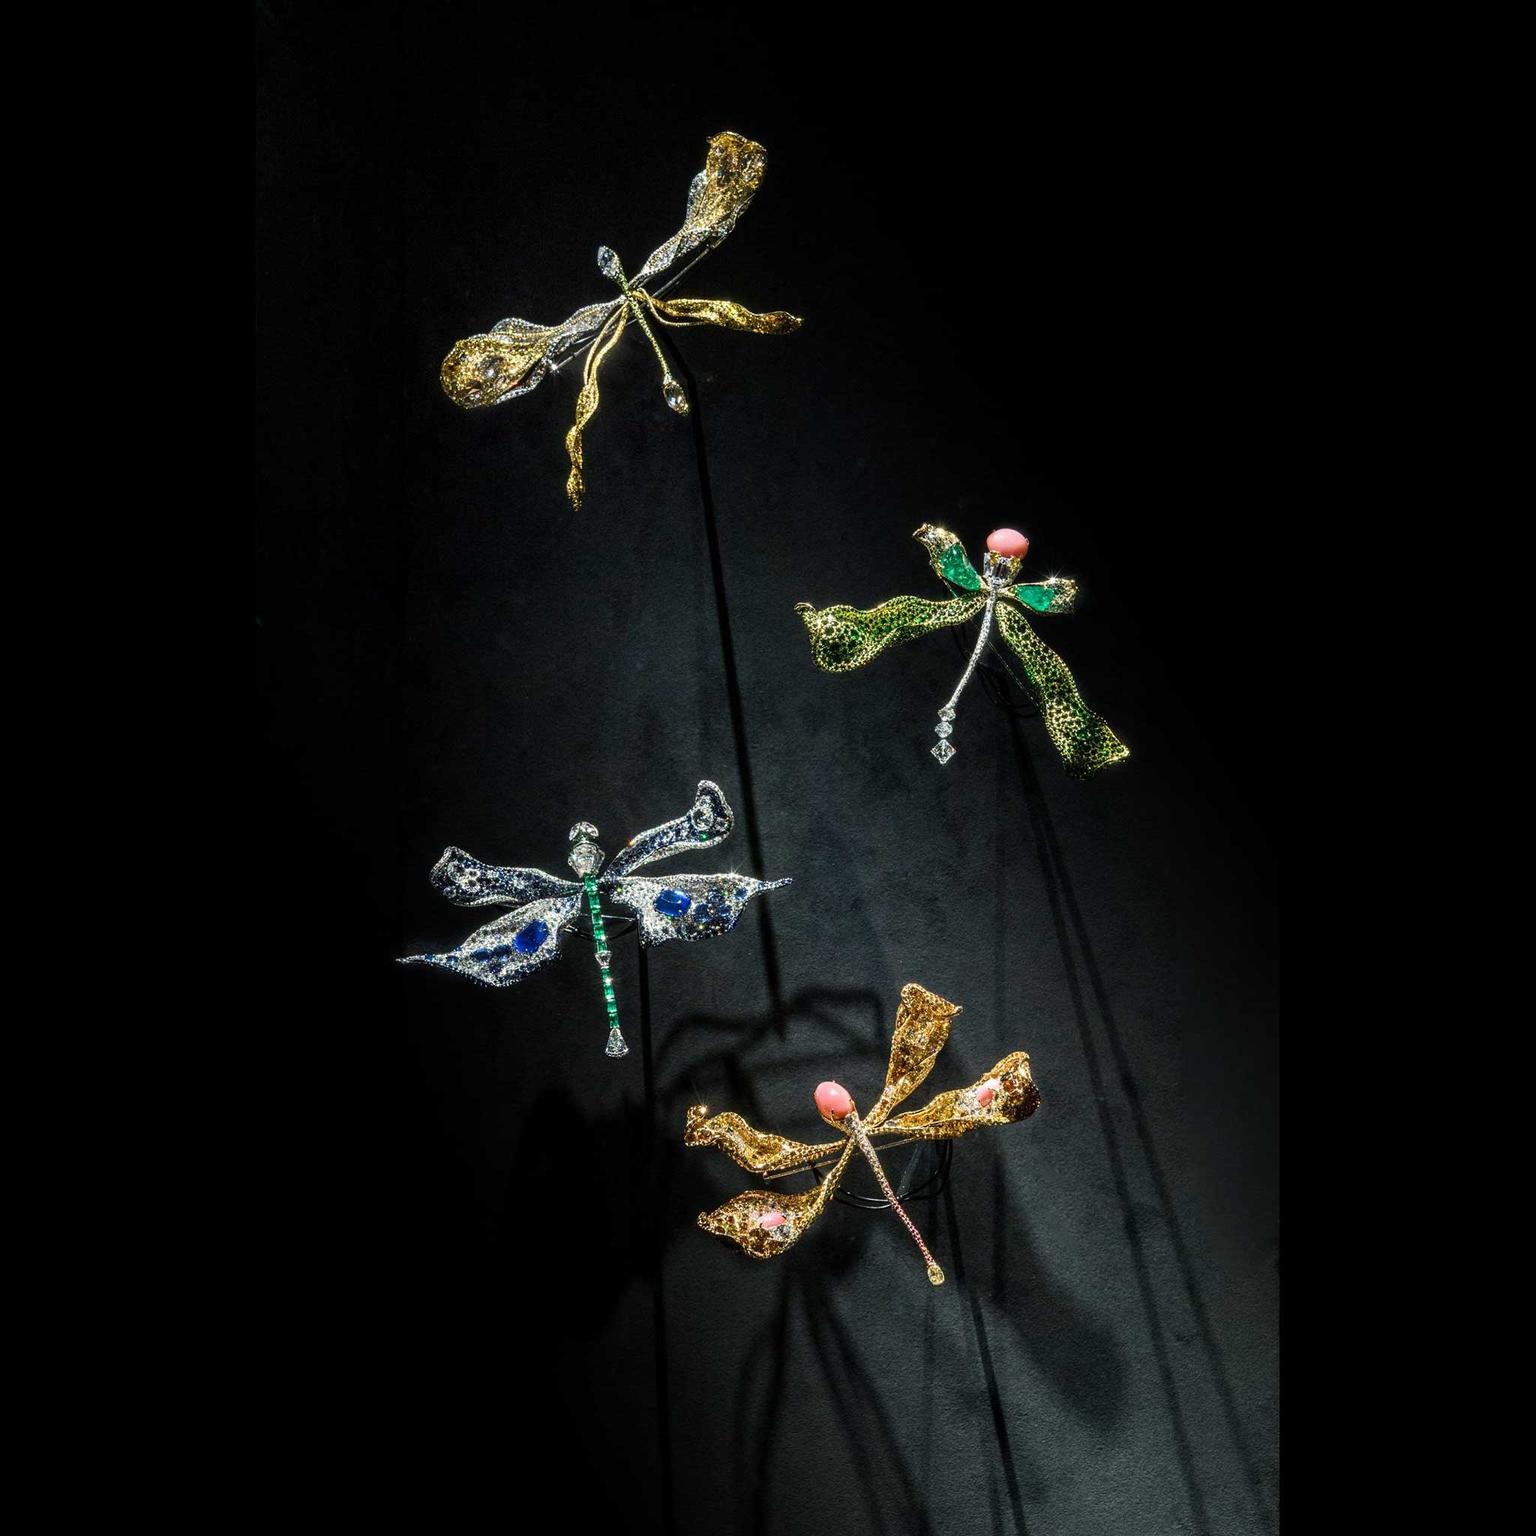 Cindy Chao Black Label Masterpiece dragonfly brooches